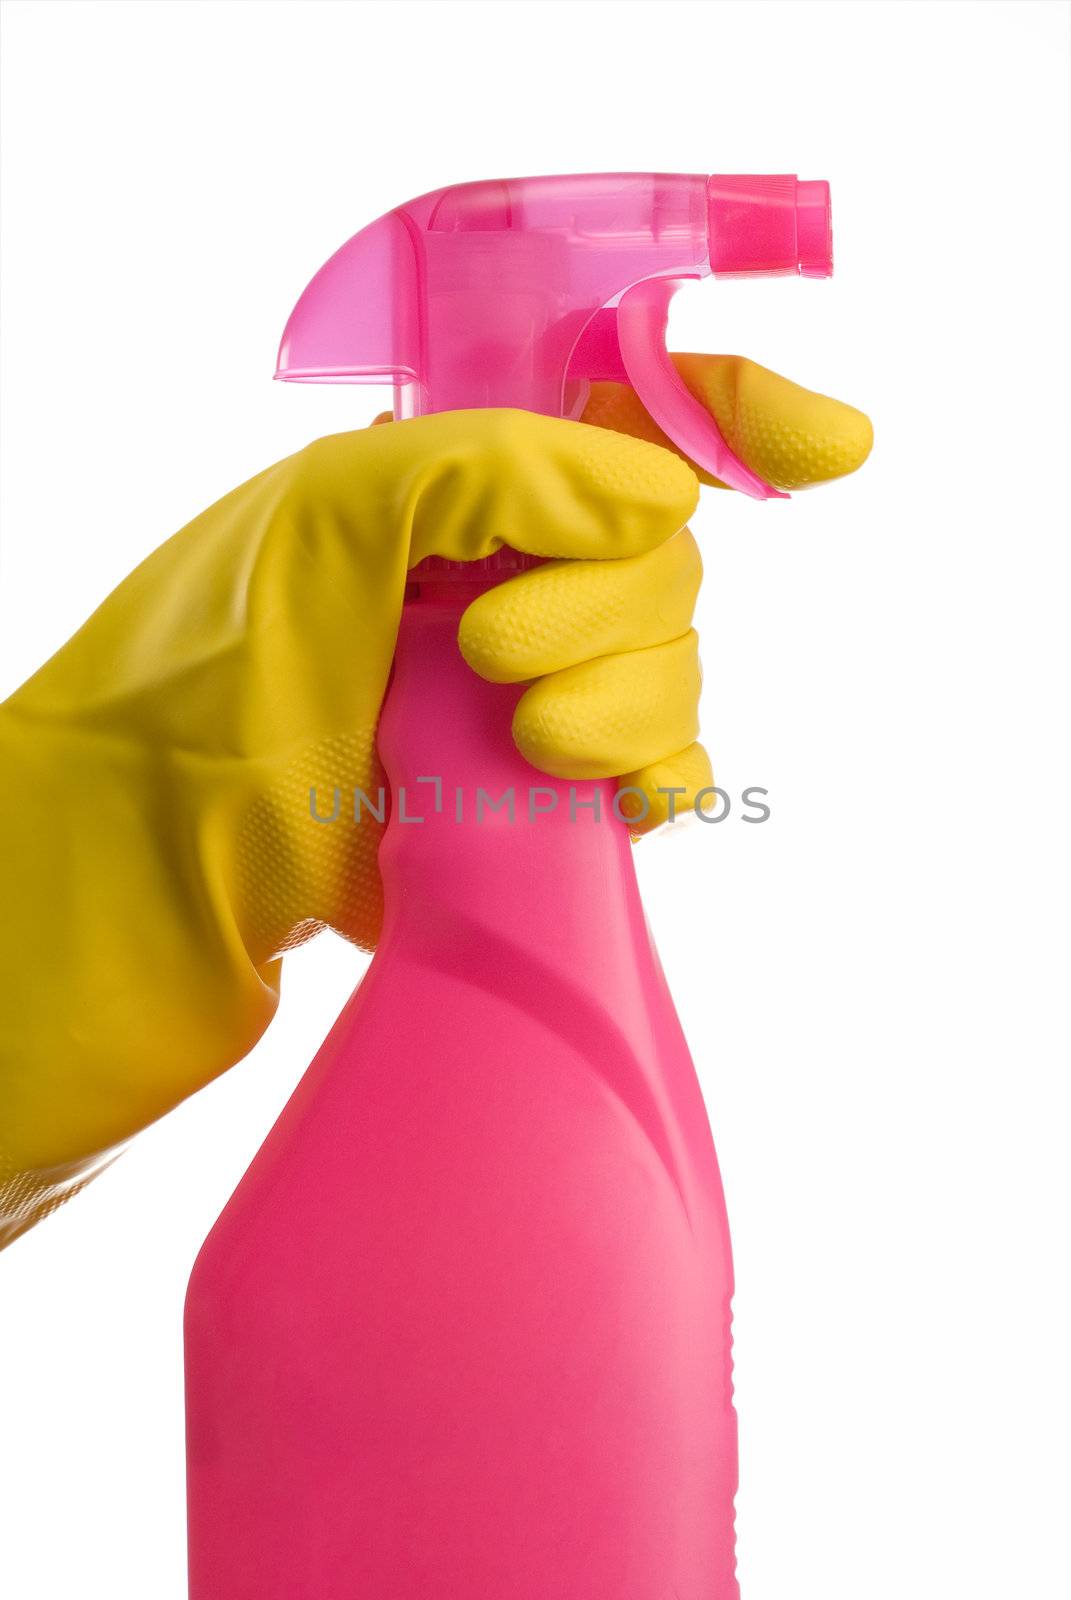 Cleaning bottle and hand by alistaircotton